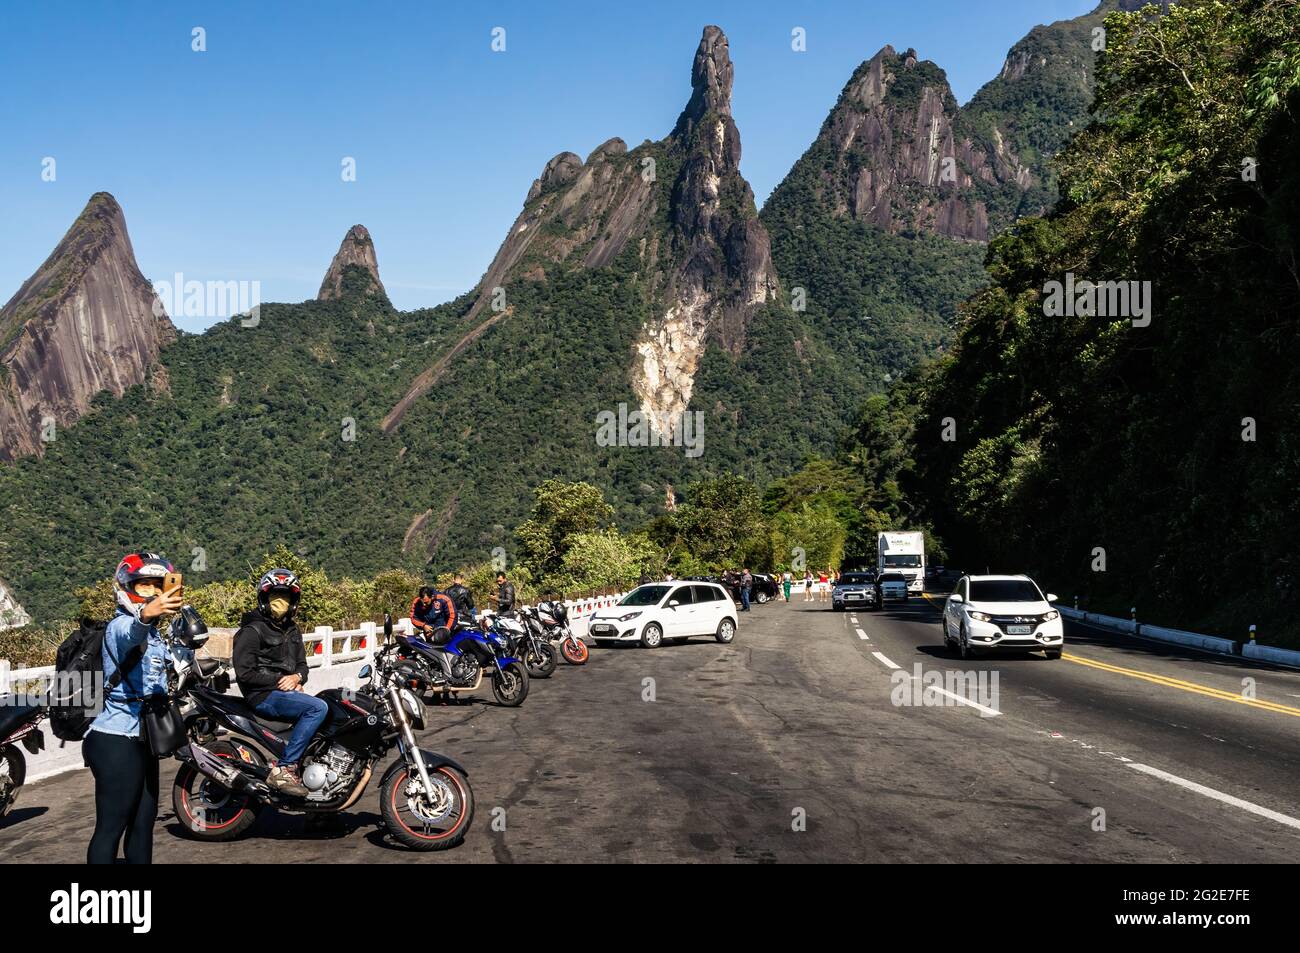 Rest area of Soberbo viewing spot at Rio-Teresopolis highway with Escalavrado, Our Lady finger, God's Finger and Cabeca de Peixe peaks at the back. Stock Photo